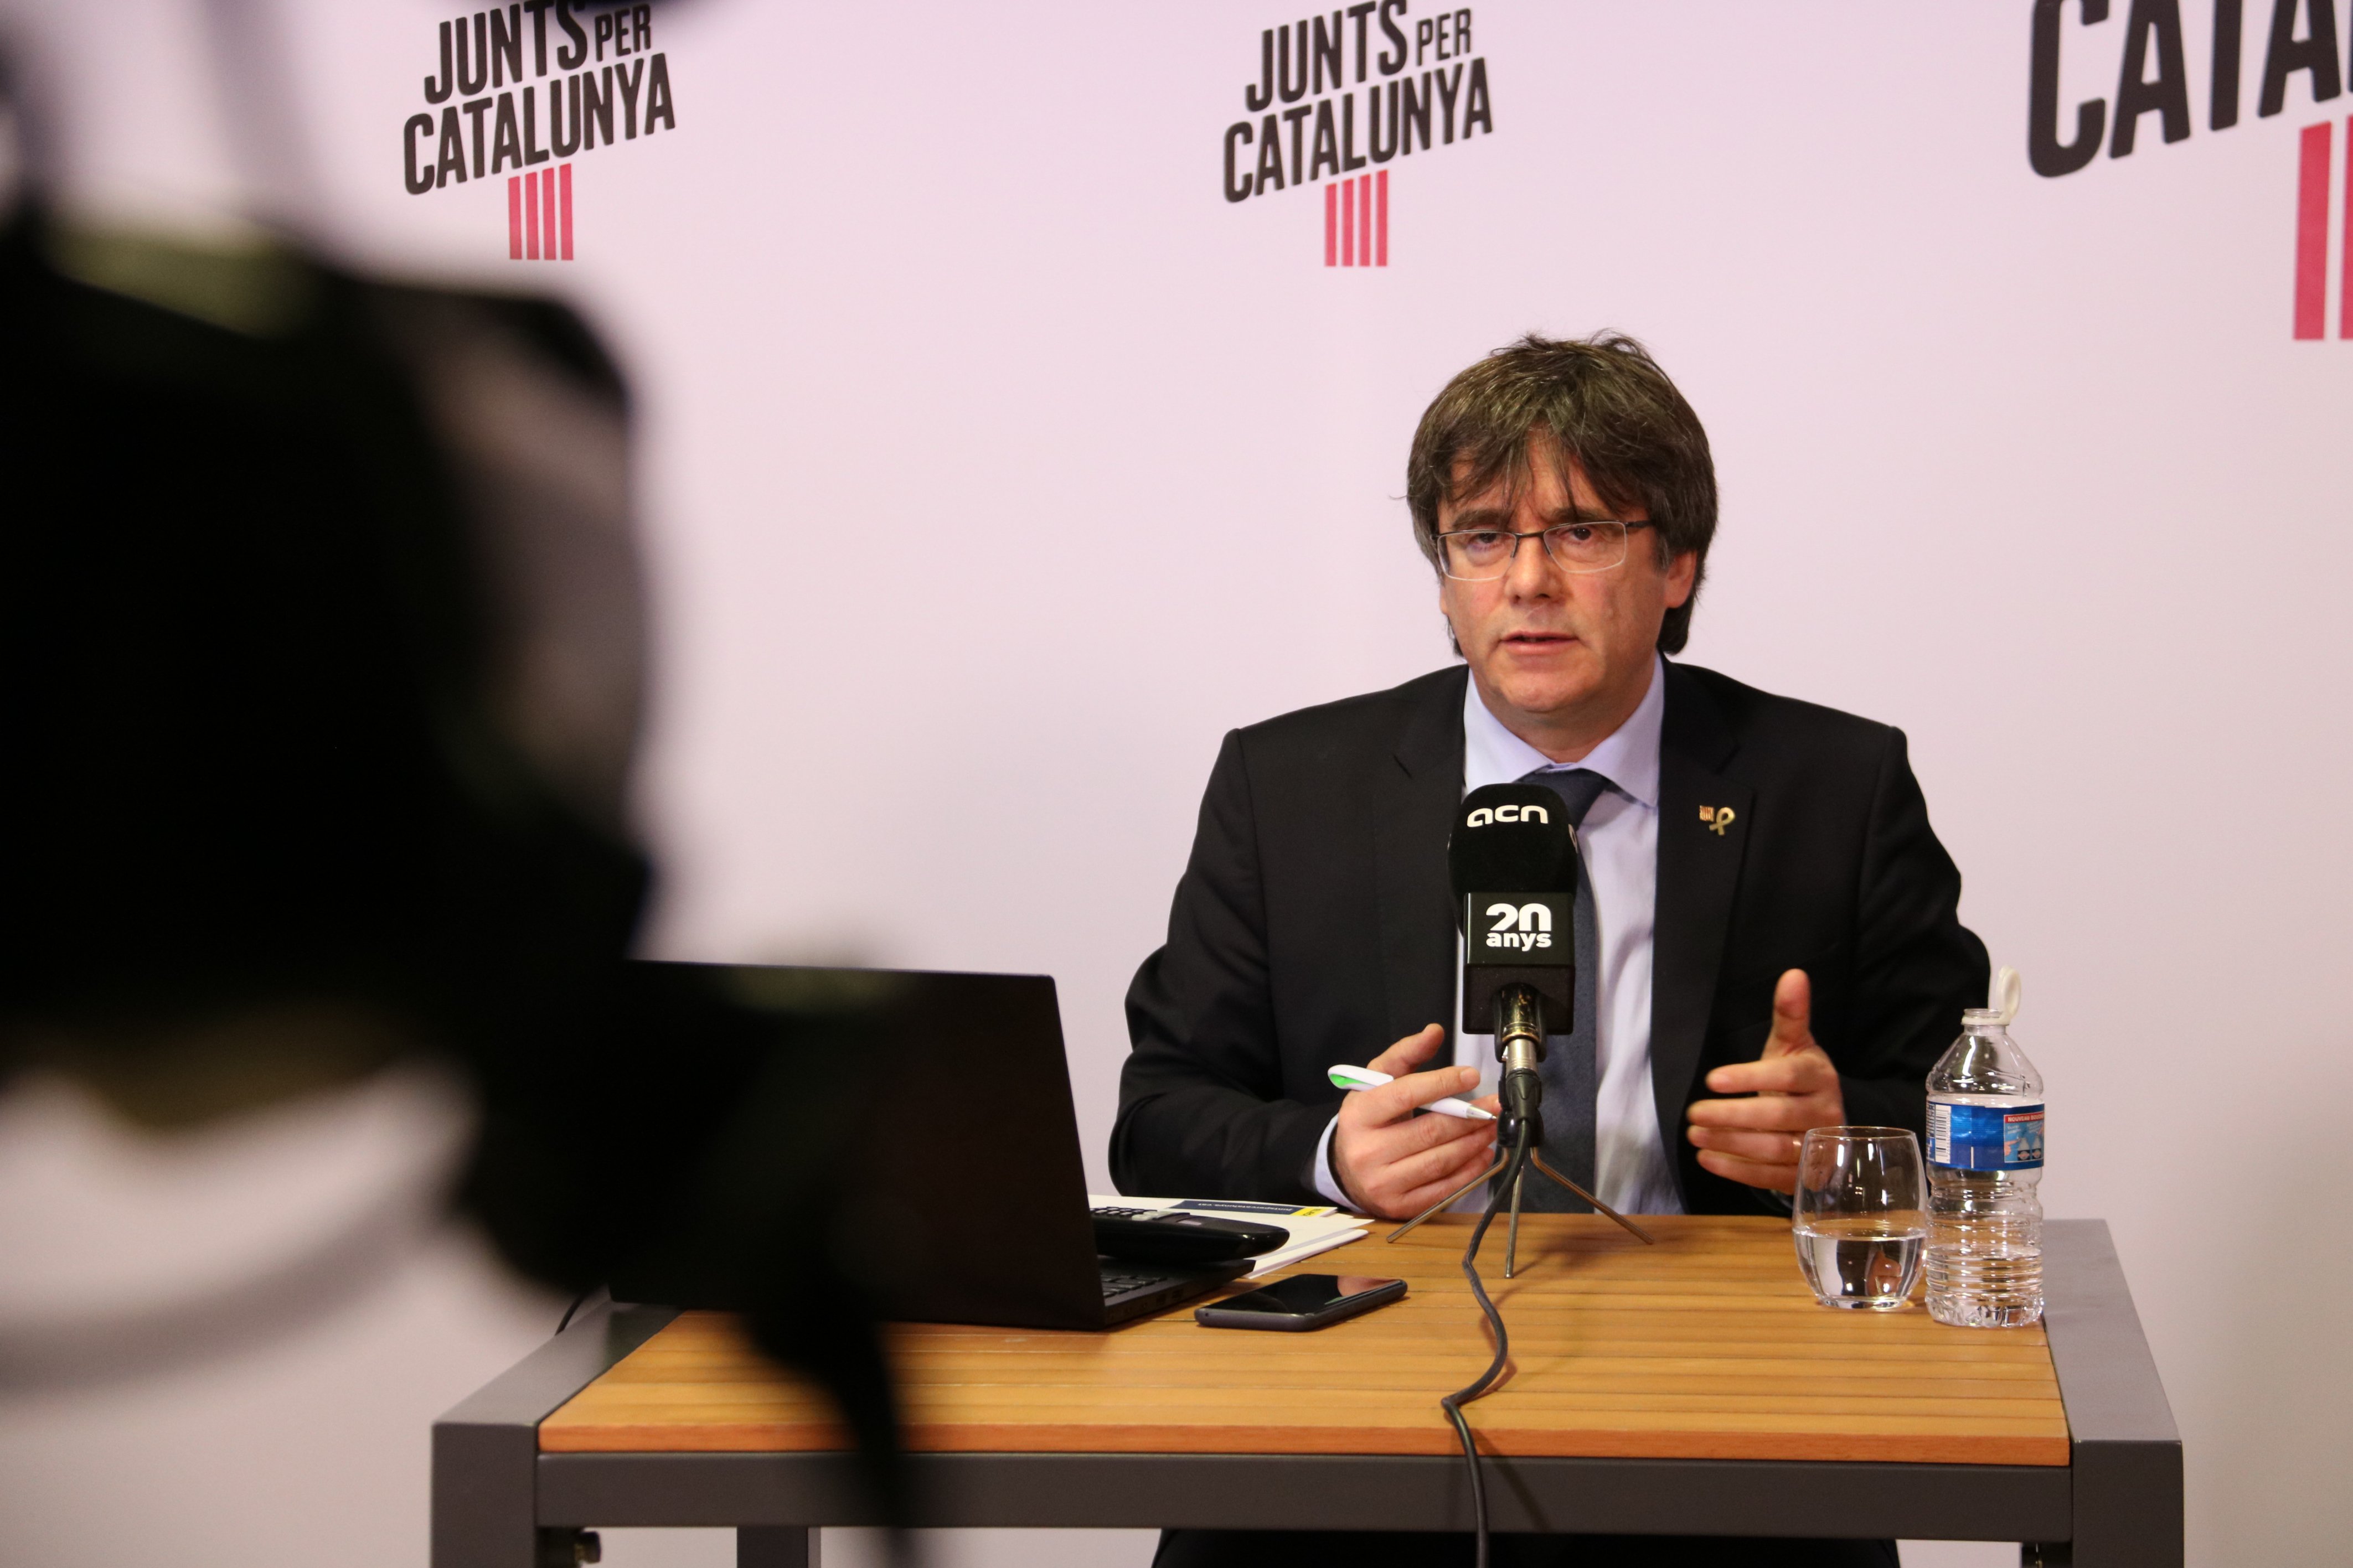 Puigdemont would renounce claim to Catalan presidency to become an MEP